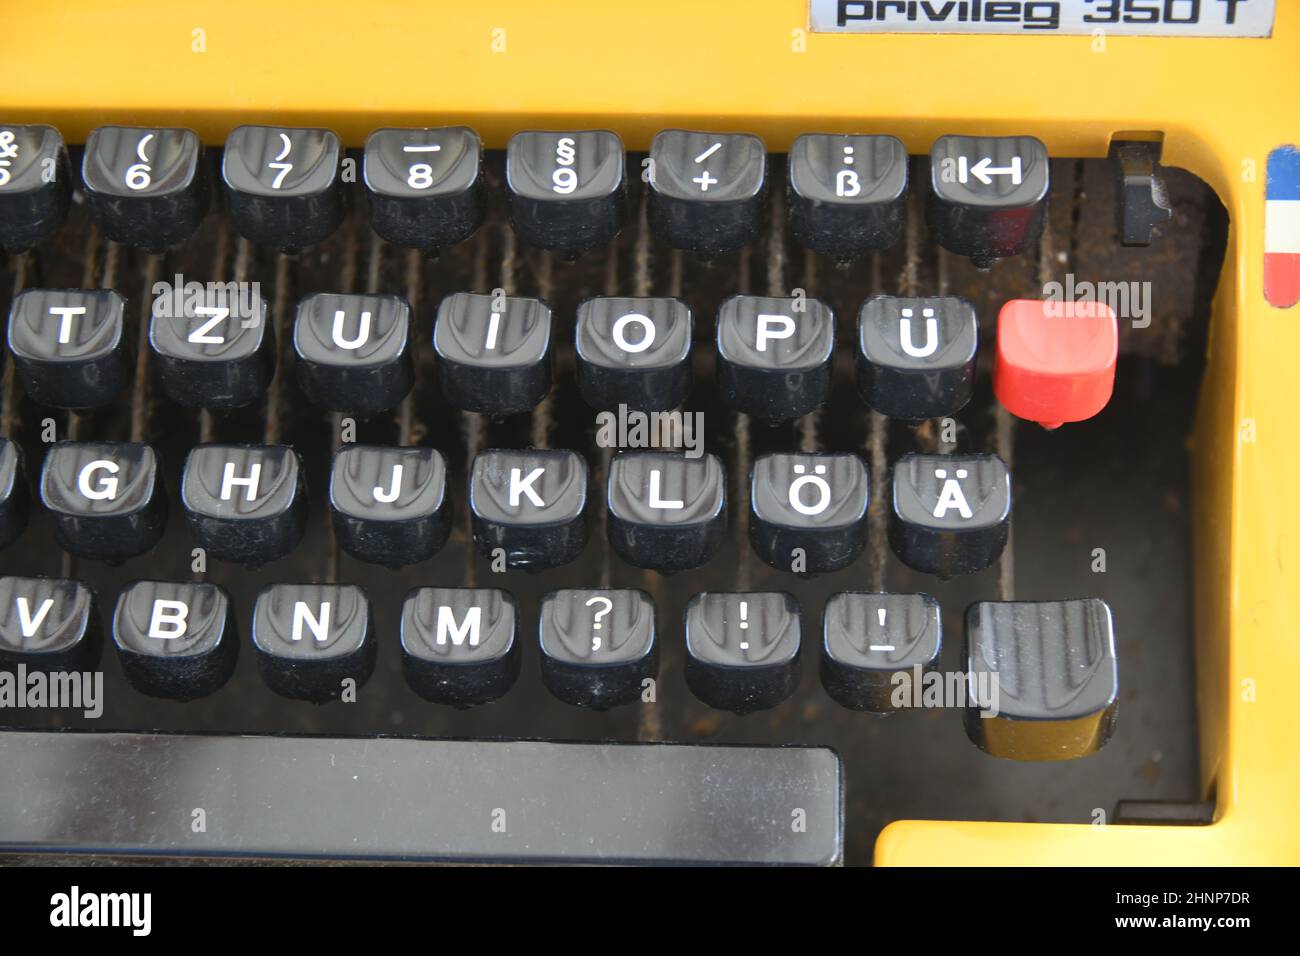 the keyboard of an old typewriter from around 1970, 'Made in Germany' Stock Photo